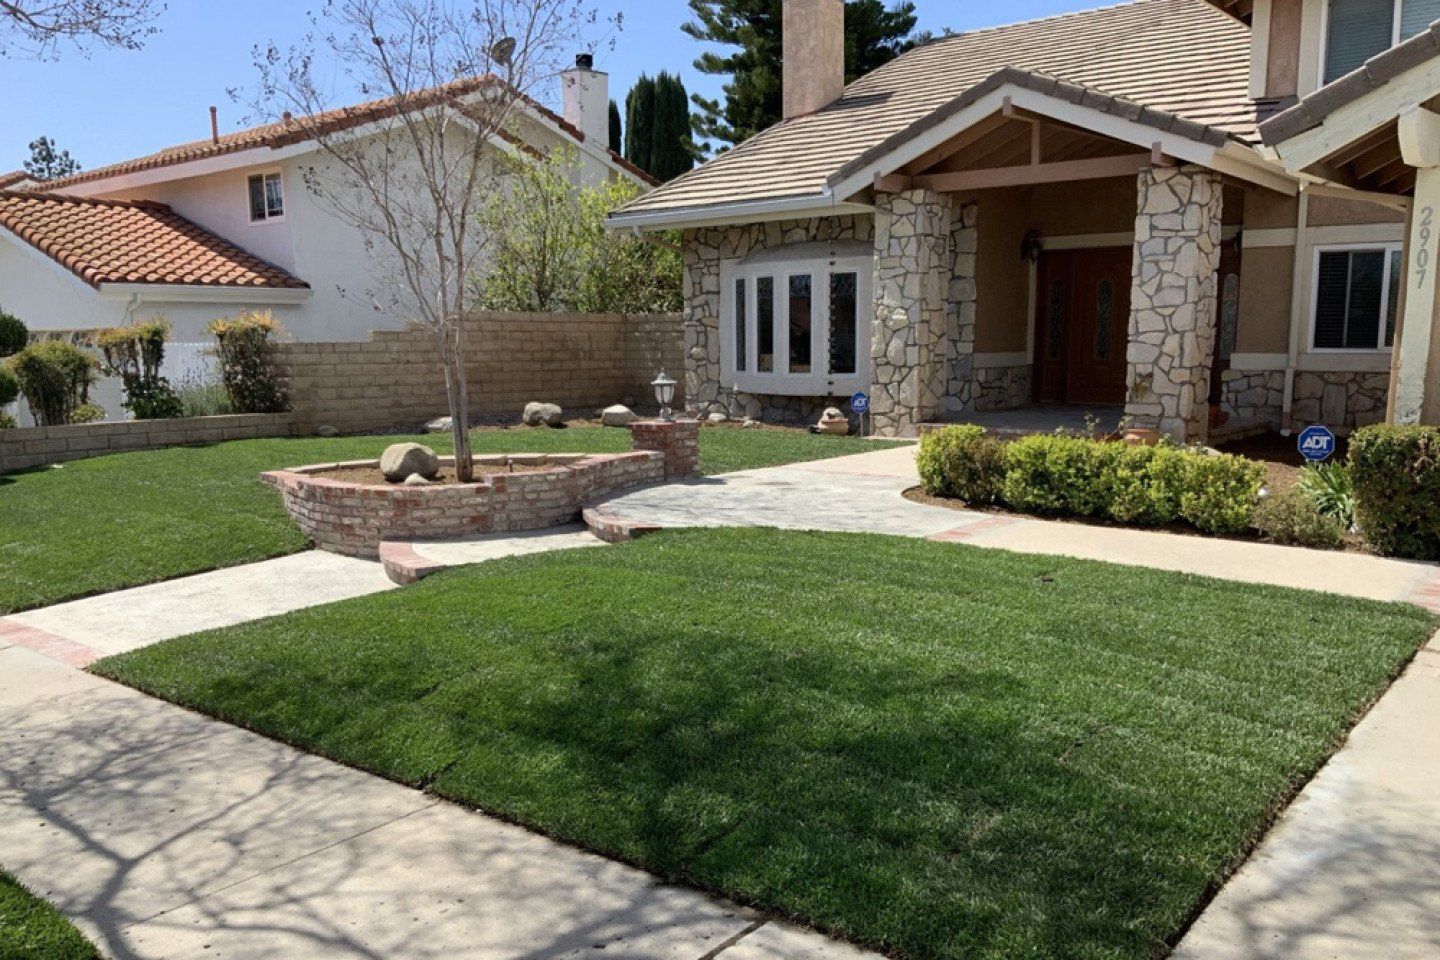 GET LAWN INSTALLATION SERVICES IN THE PINE MOUNTAIN CLUB & VALENCIA, CA AREA